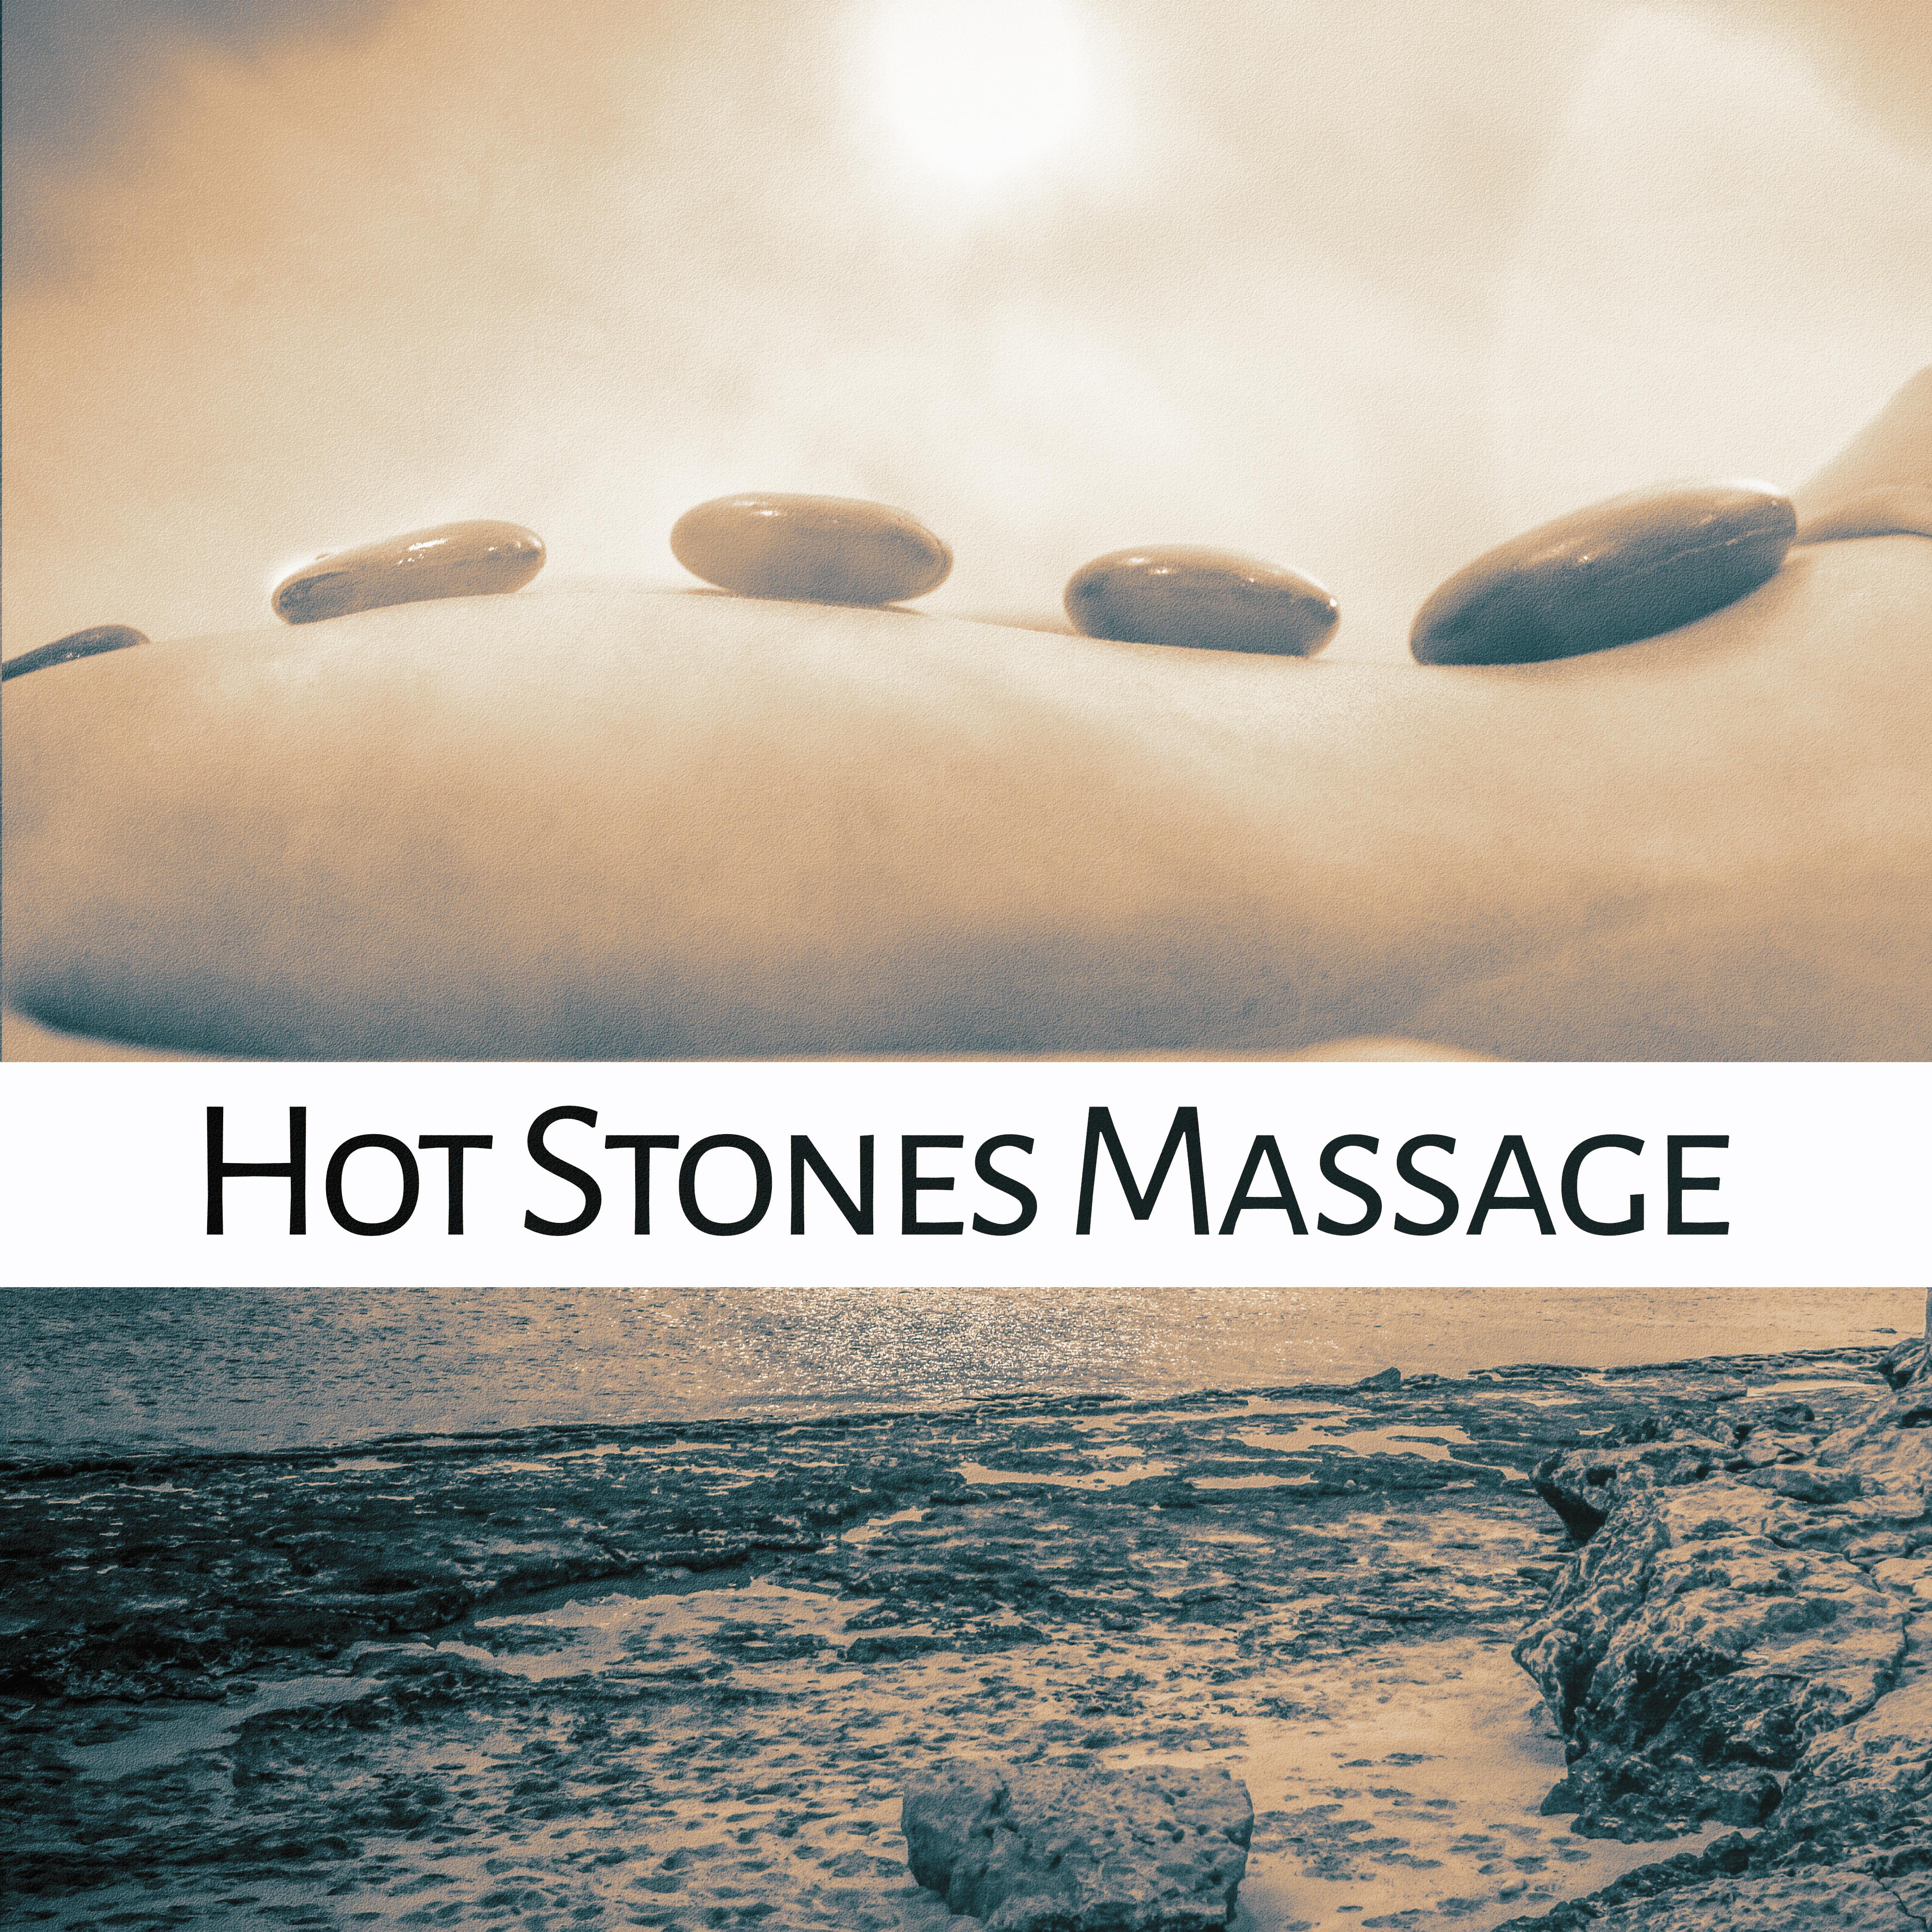 Hot Stones Massage  Relax in Spa, Anti Stress Music, Peaceful Mind, Spa Music, Wellness, Sounds of Sea, Ocean Dreams, Relaxation